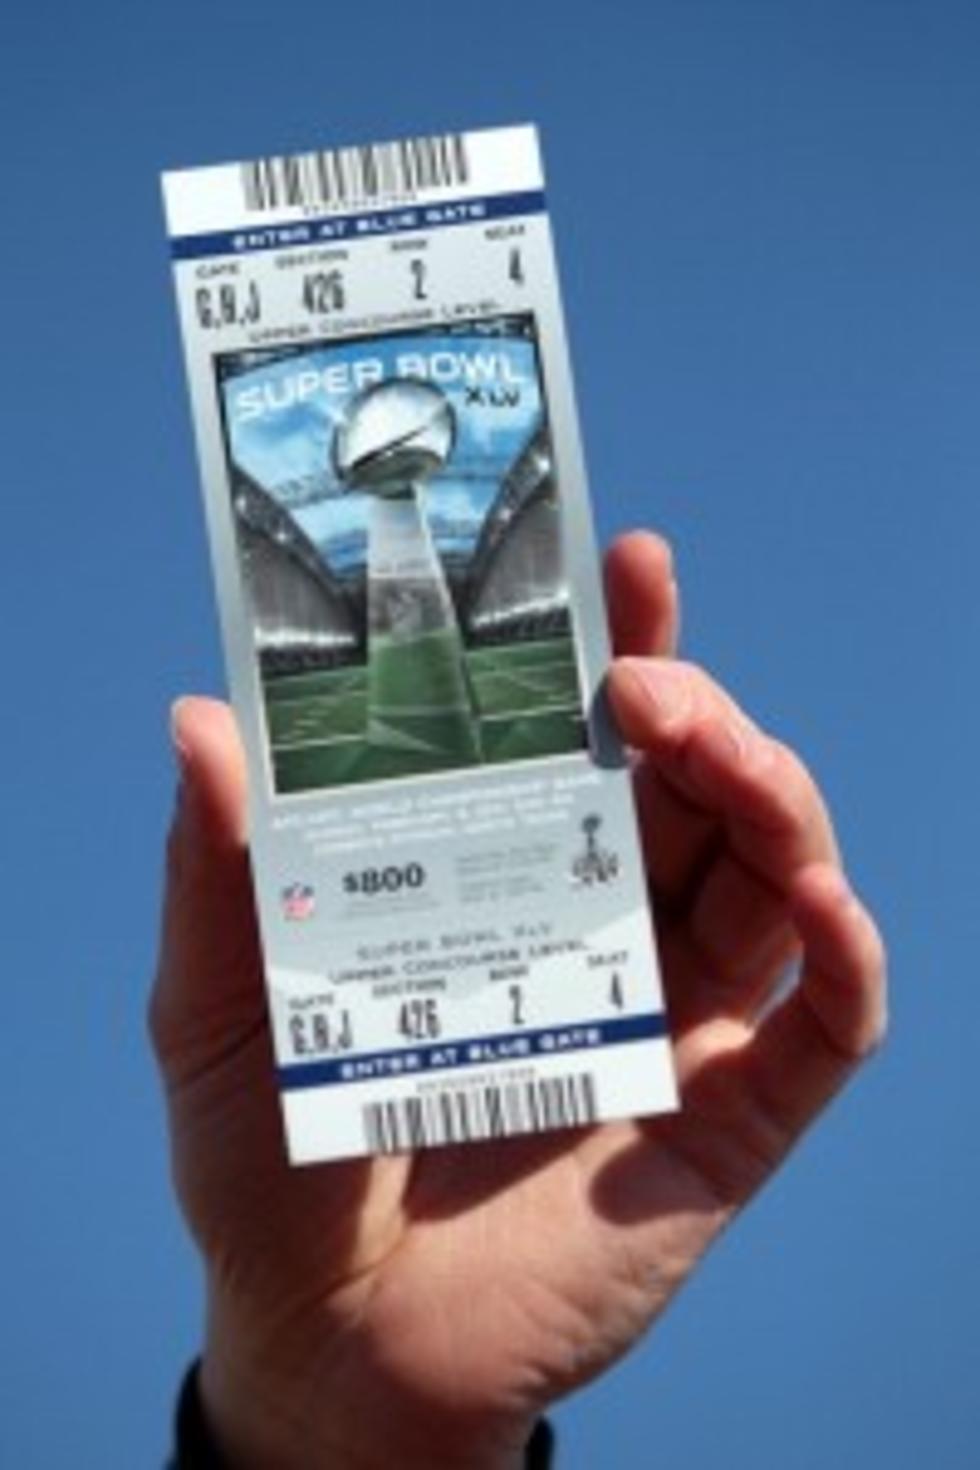 What Are Super Bowl Tickets Selling For? How Do I Get Some?